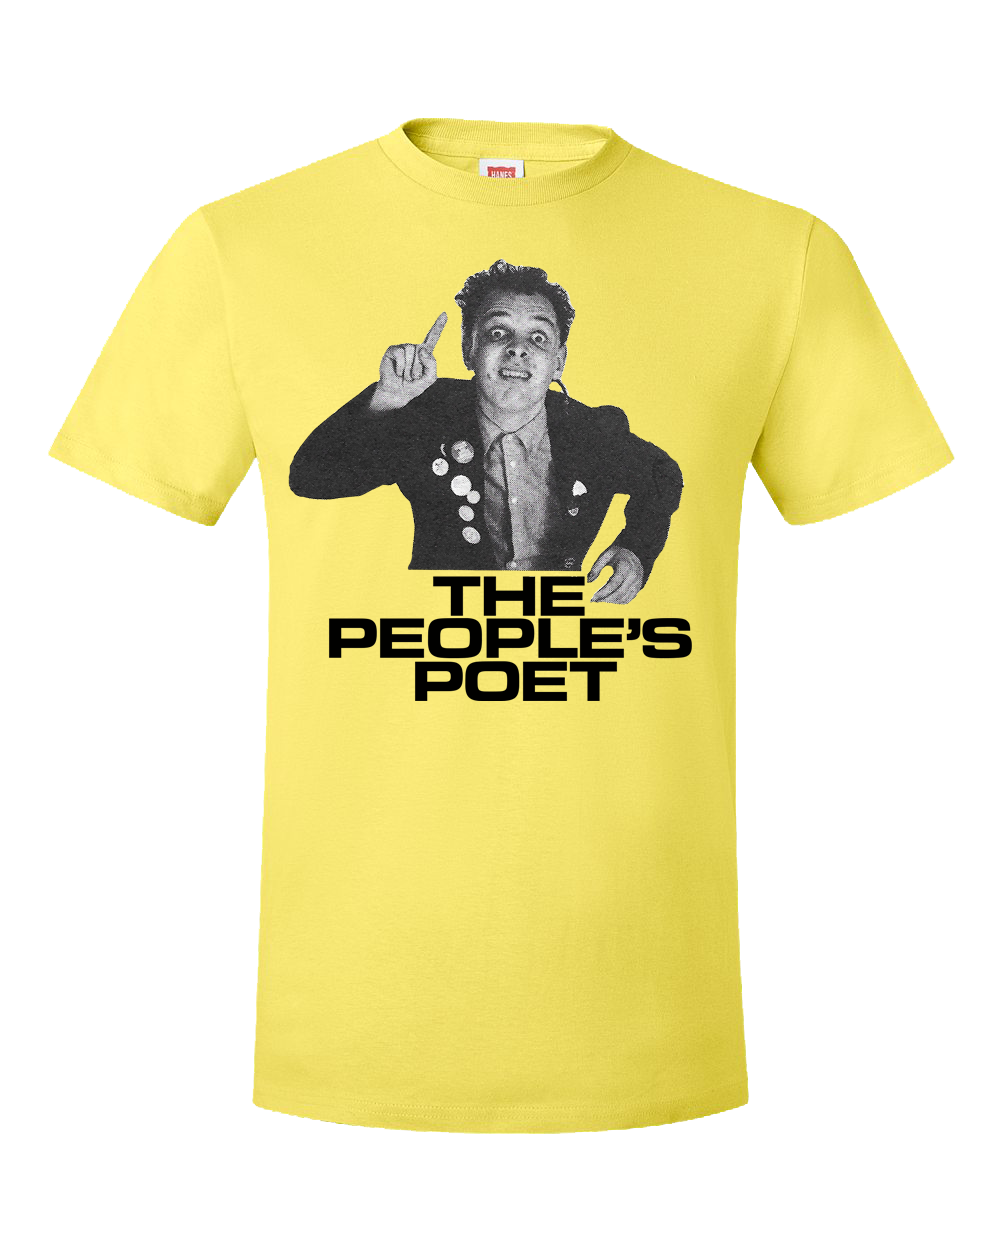 THE YOUNG ONES - RIK IS THE PEOPLE'S POET T-SHIRT